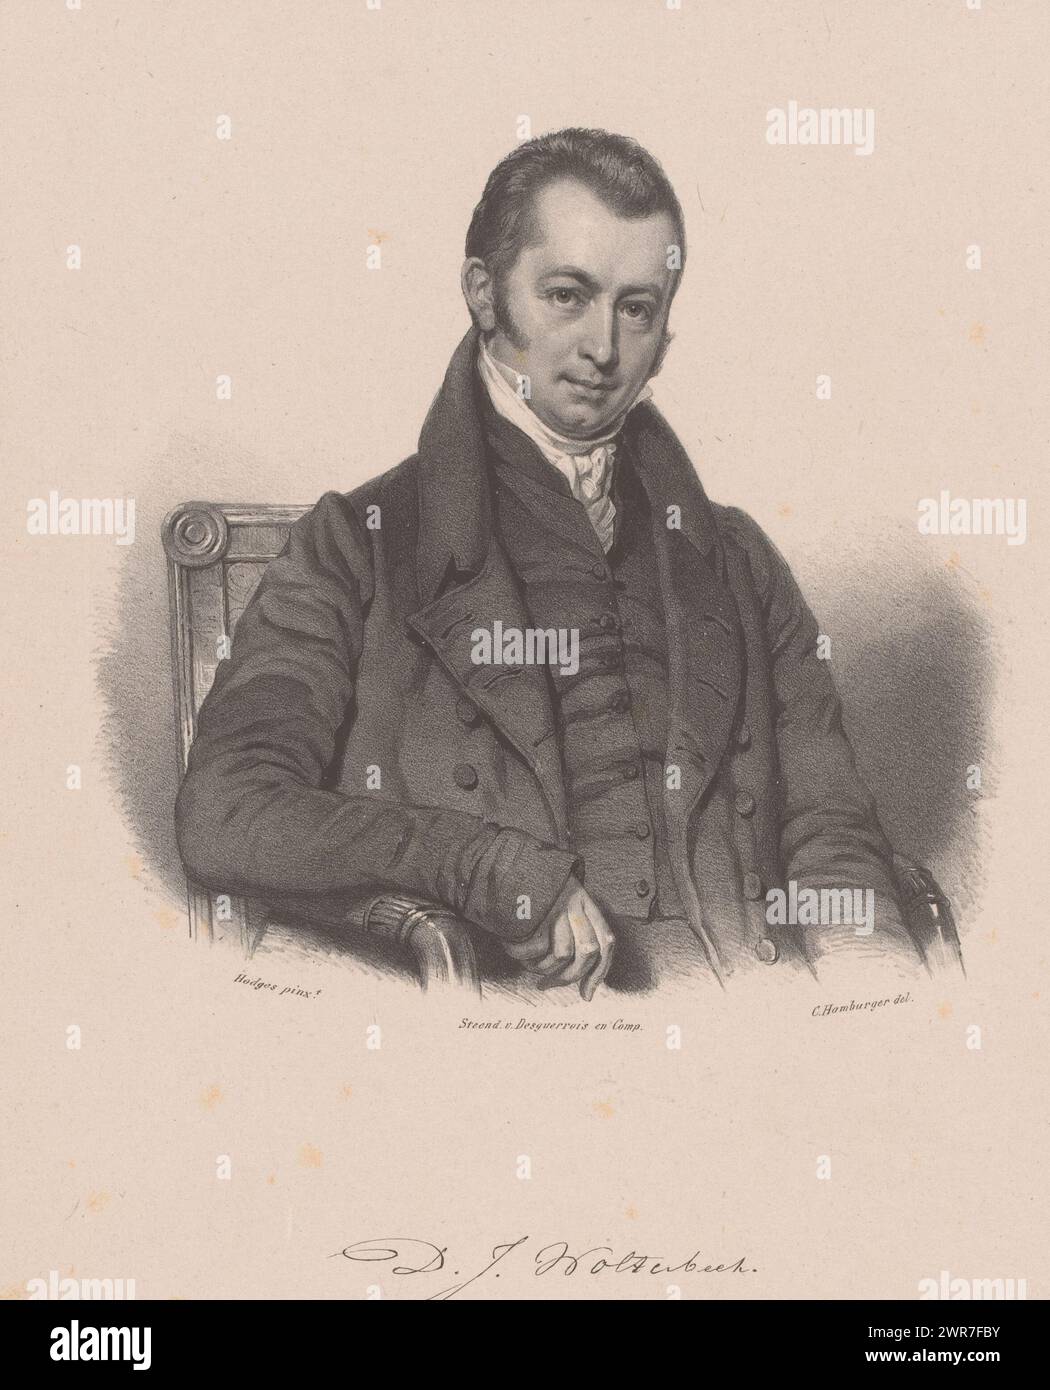 Portrait of Dirk Jacob Wolterbeek, Below the portrait the signature of the sitter., print maker: Coenraad Hamburger, after painting by: Charles Howard Hodges, printer: Desguerrois & Co., Amsterdam, 1819 - in or before 1891, paper, height 445 mm × width 310 mm, print Stock Photo